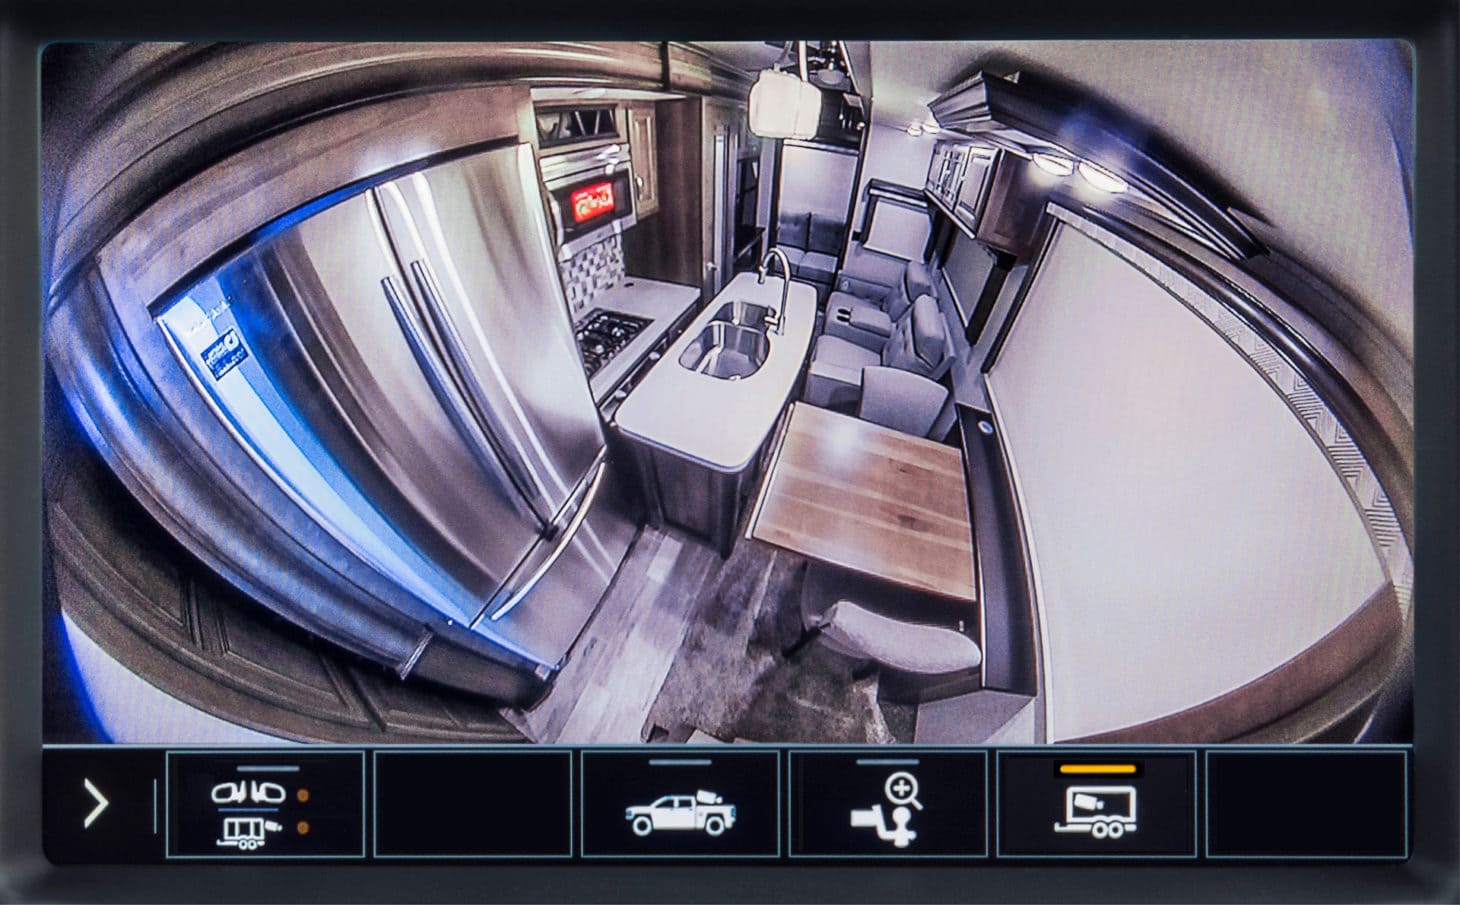 View of camera in pickup truck of attached travel trailer interior